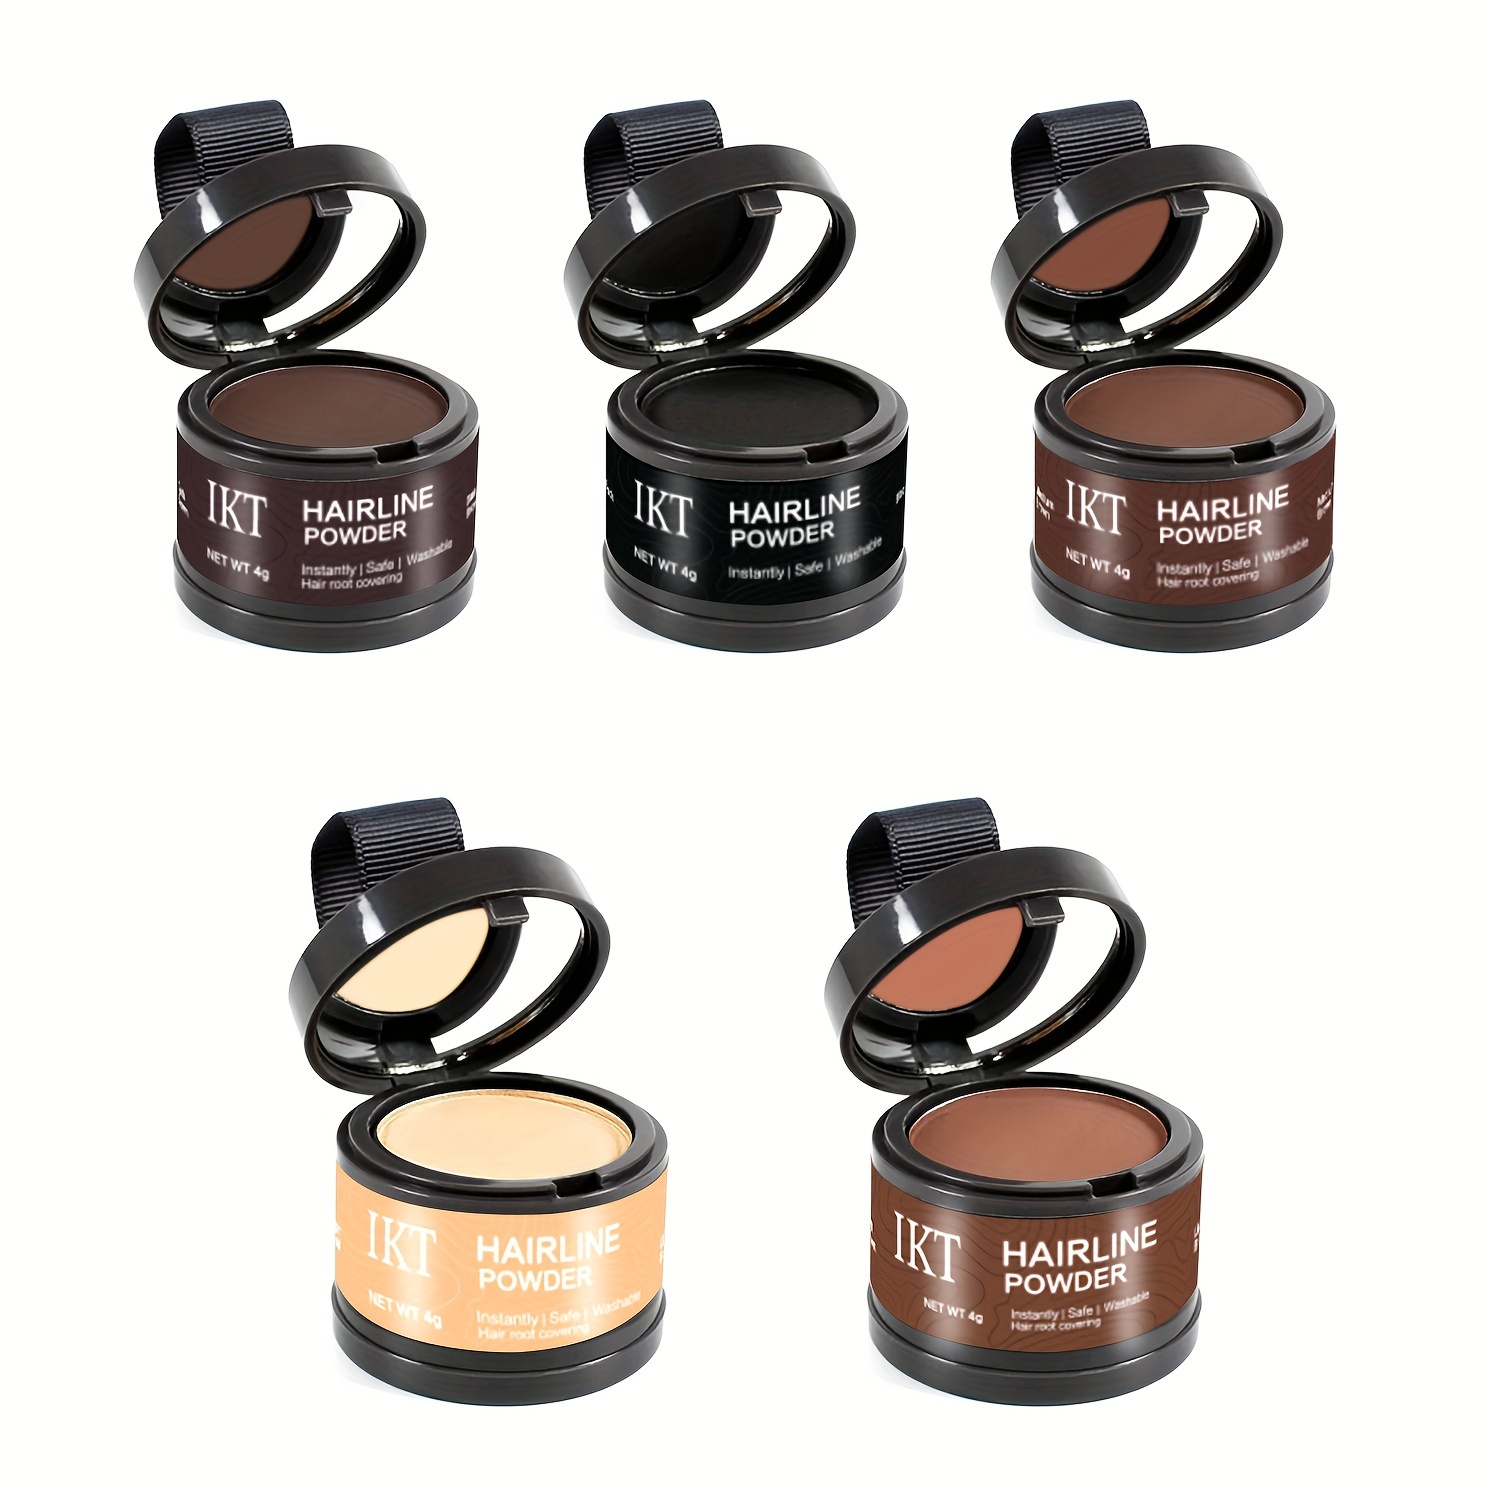 

Hairline Powder, Instantly Hair Line Powder Shadow, Quick Cover Grey Hair Root Concealer